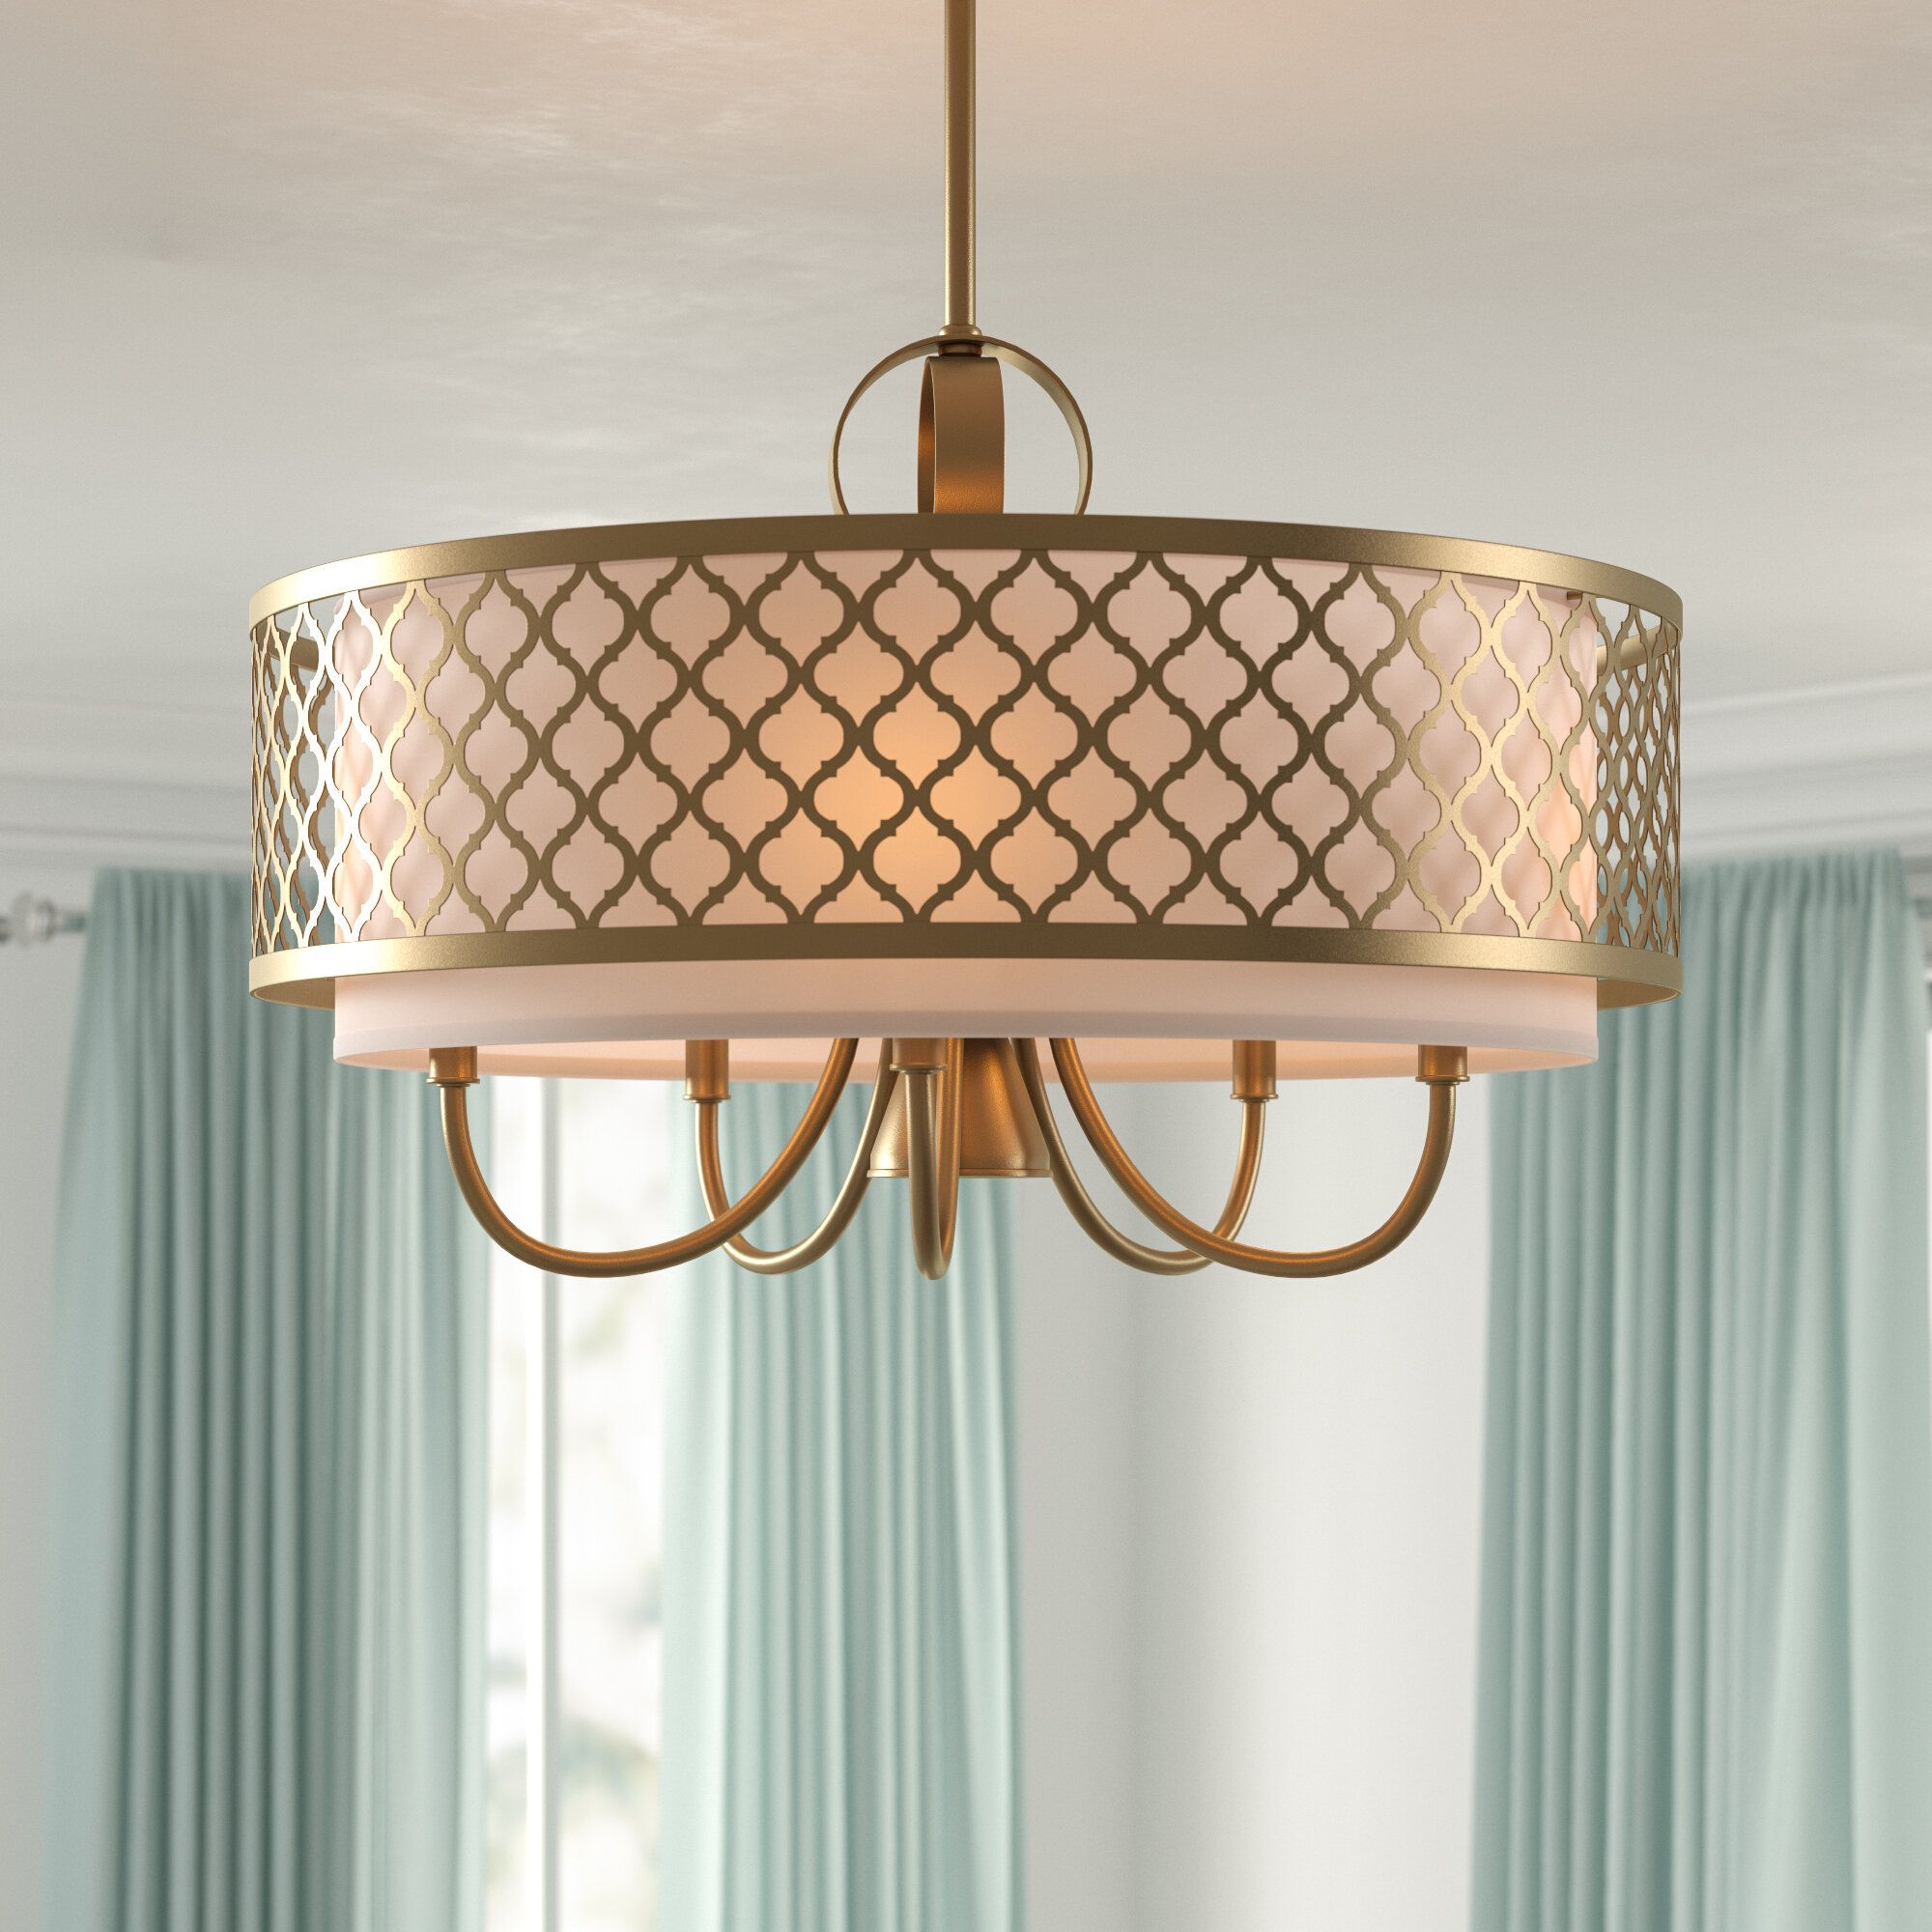 Tymvou 6 Light Drum Chandelier Intended For Wightman Drum Chandeliers (View 10 of 30)